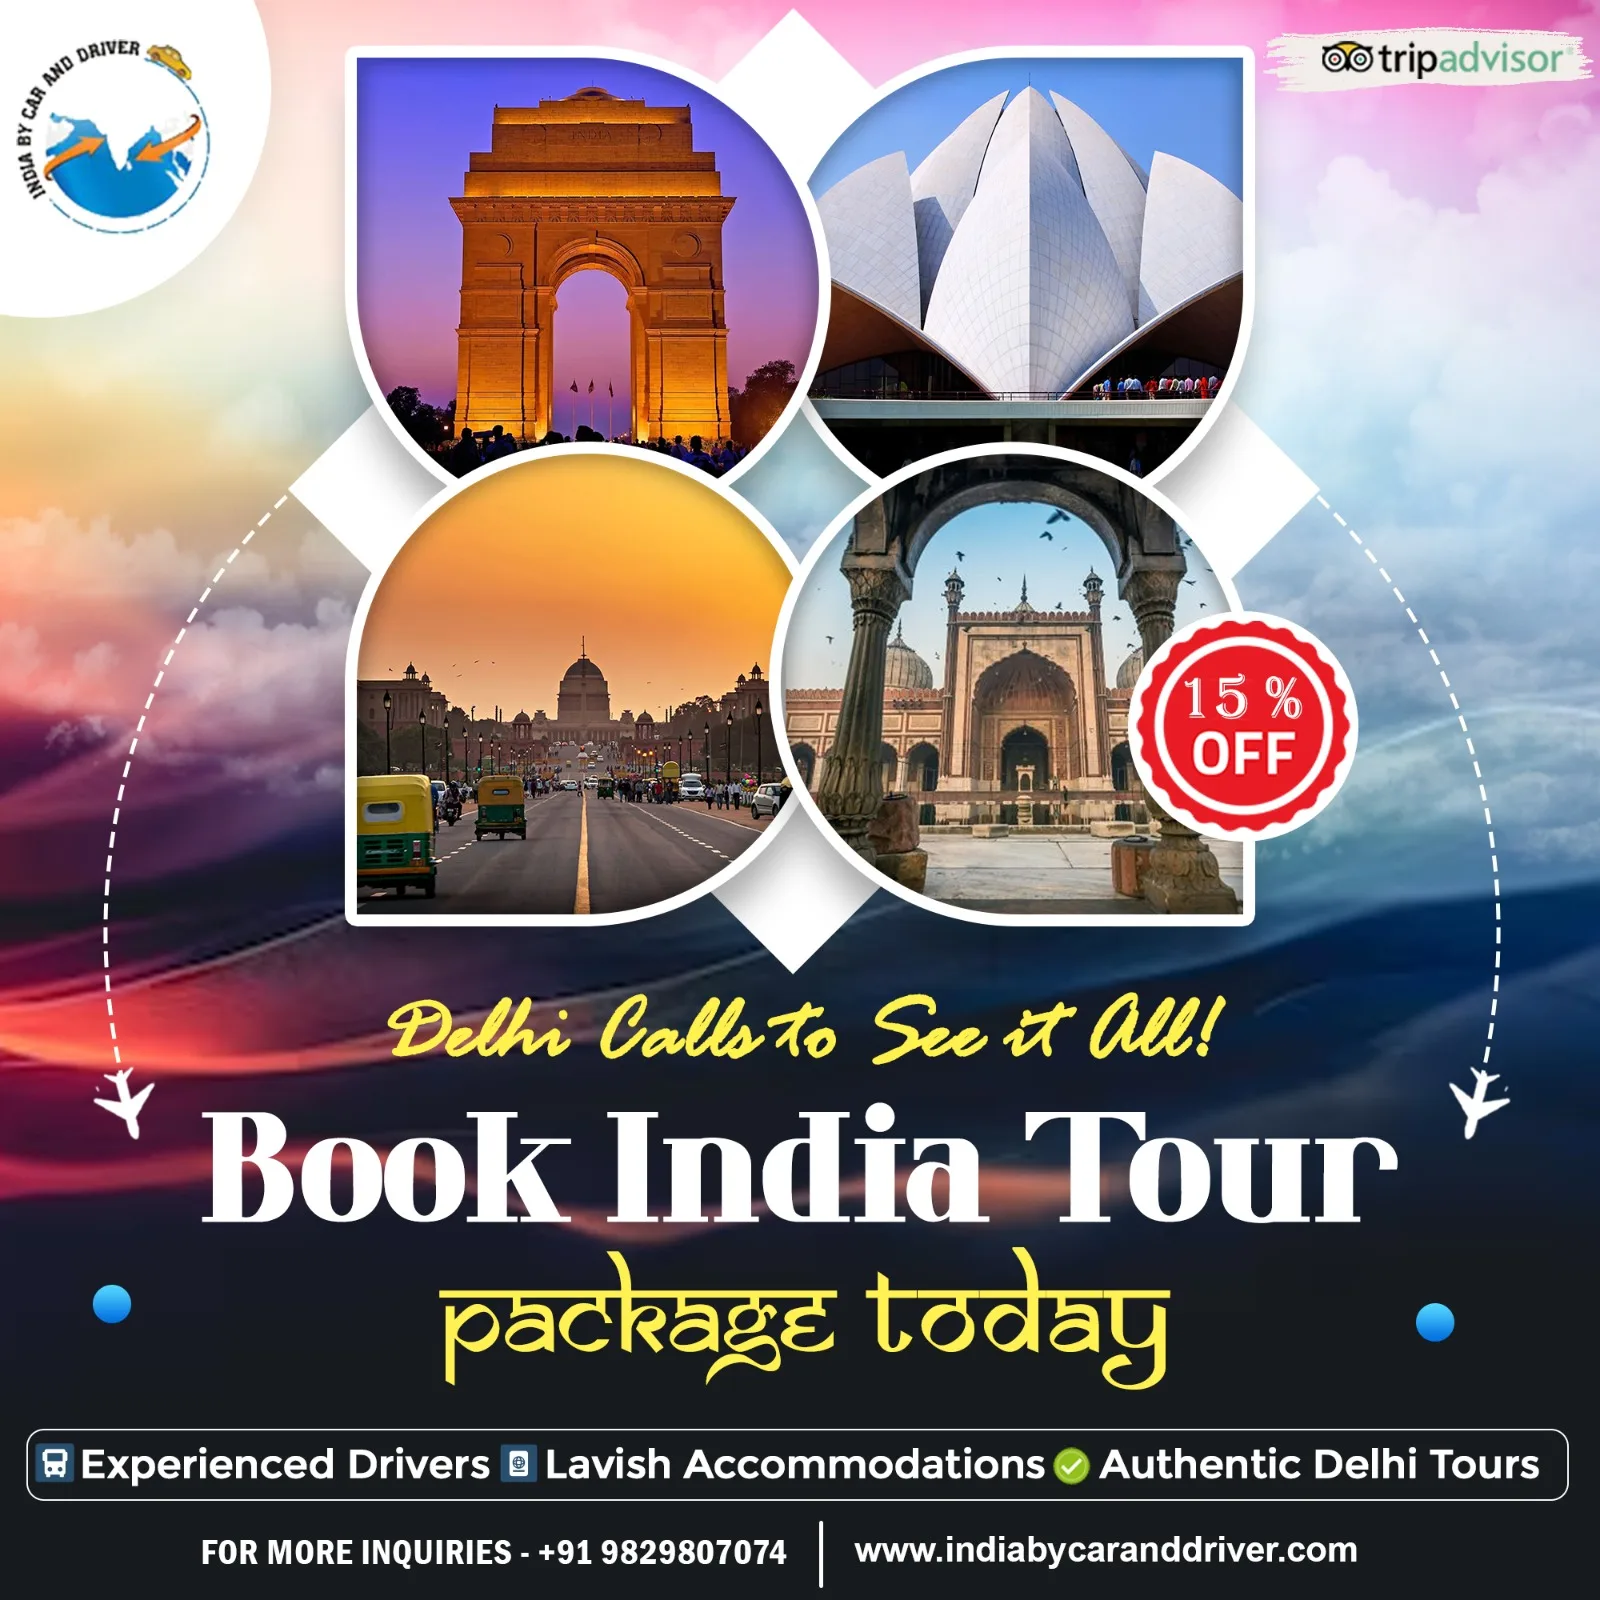 How to Book Delhi Tour Packages with Best India Tour Operator?